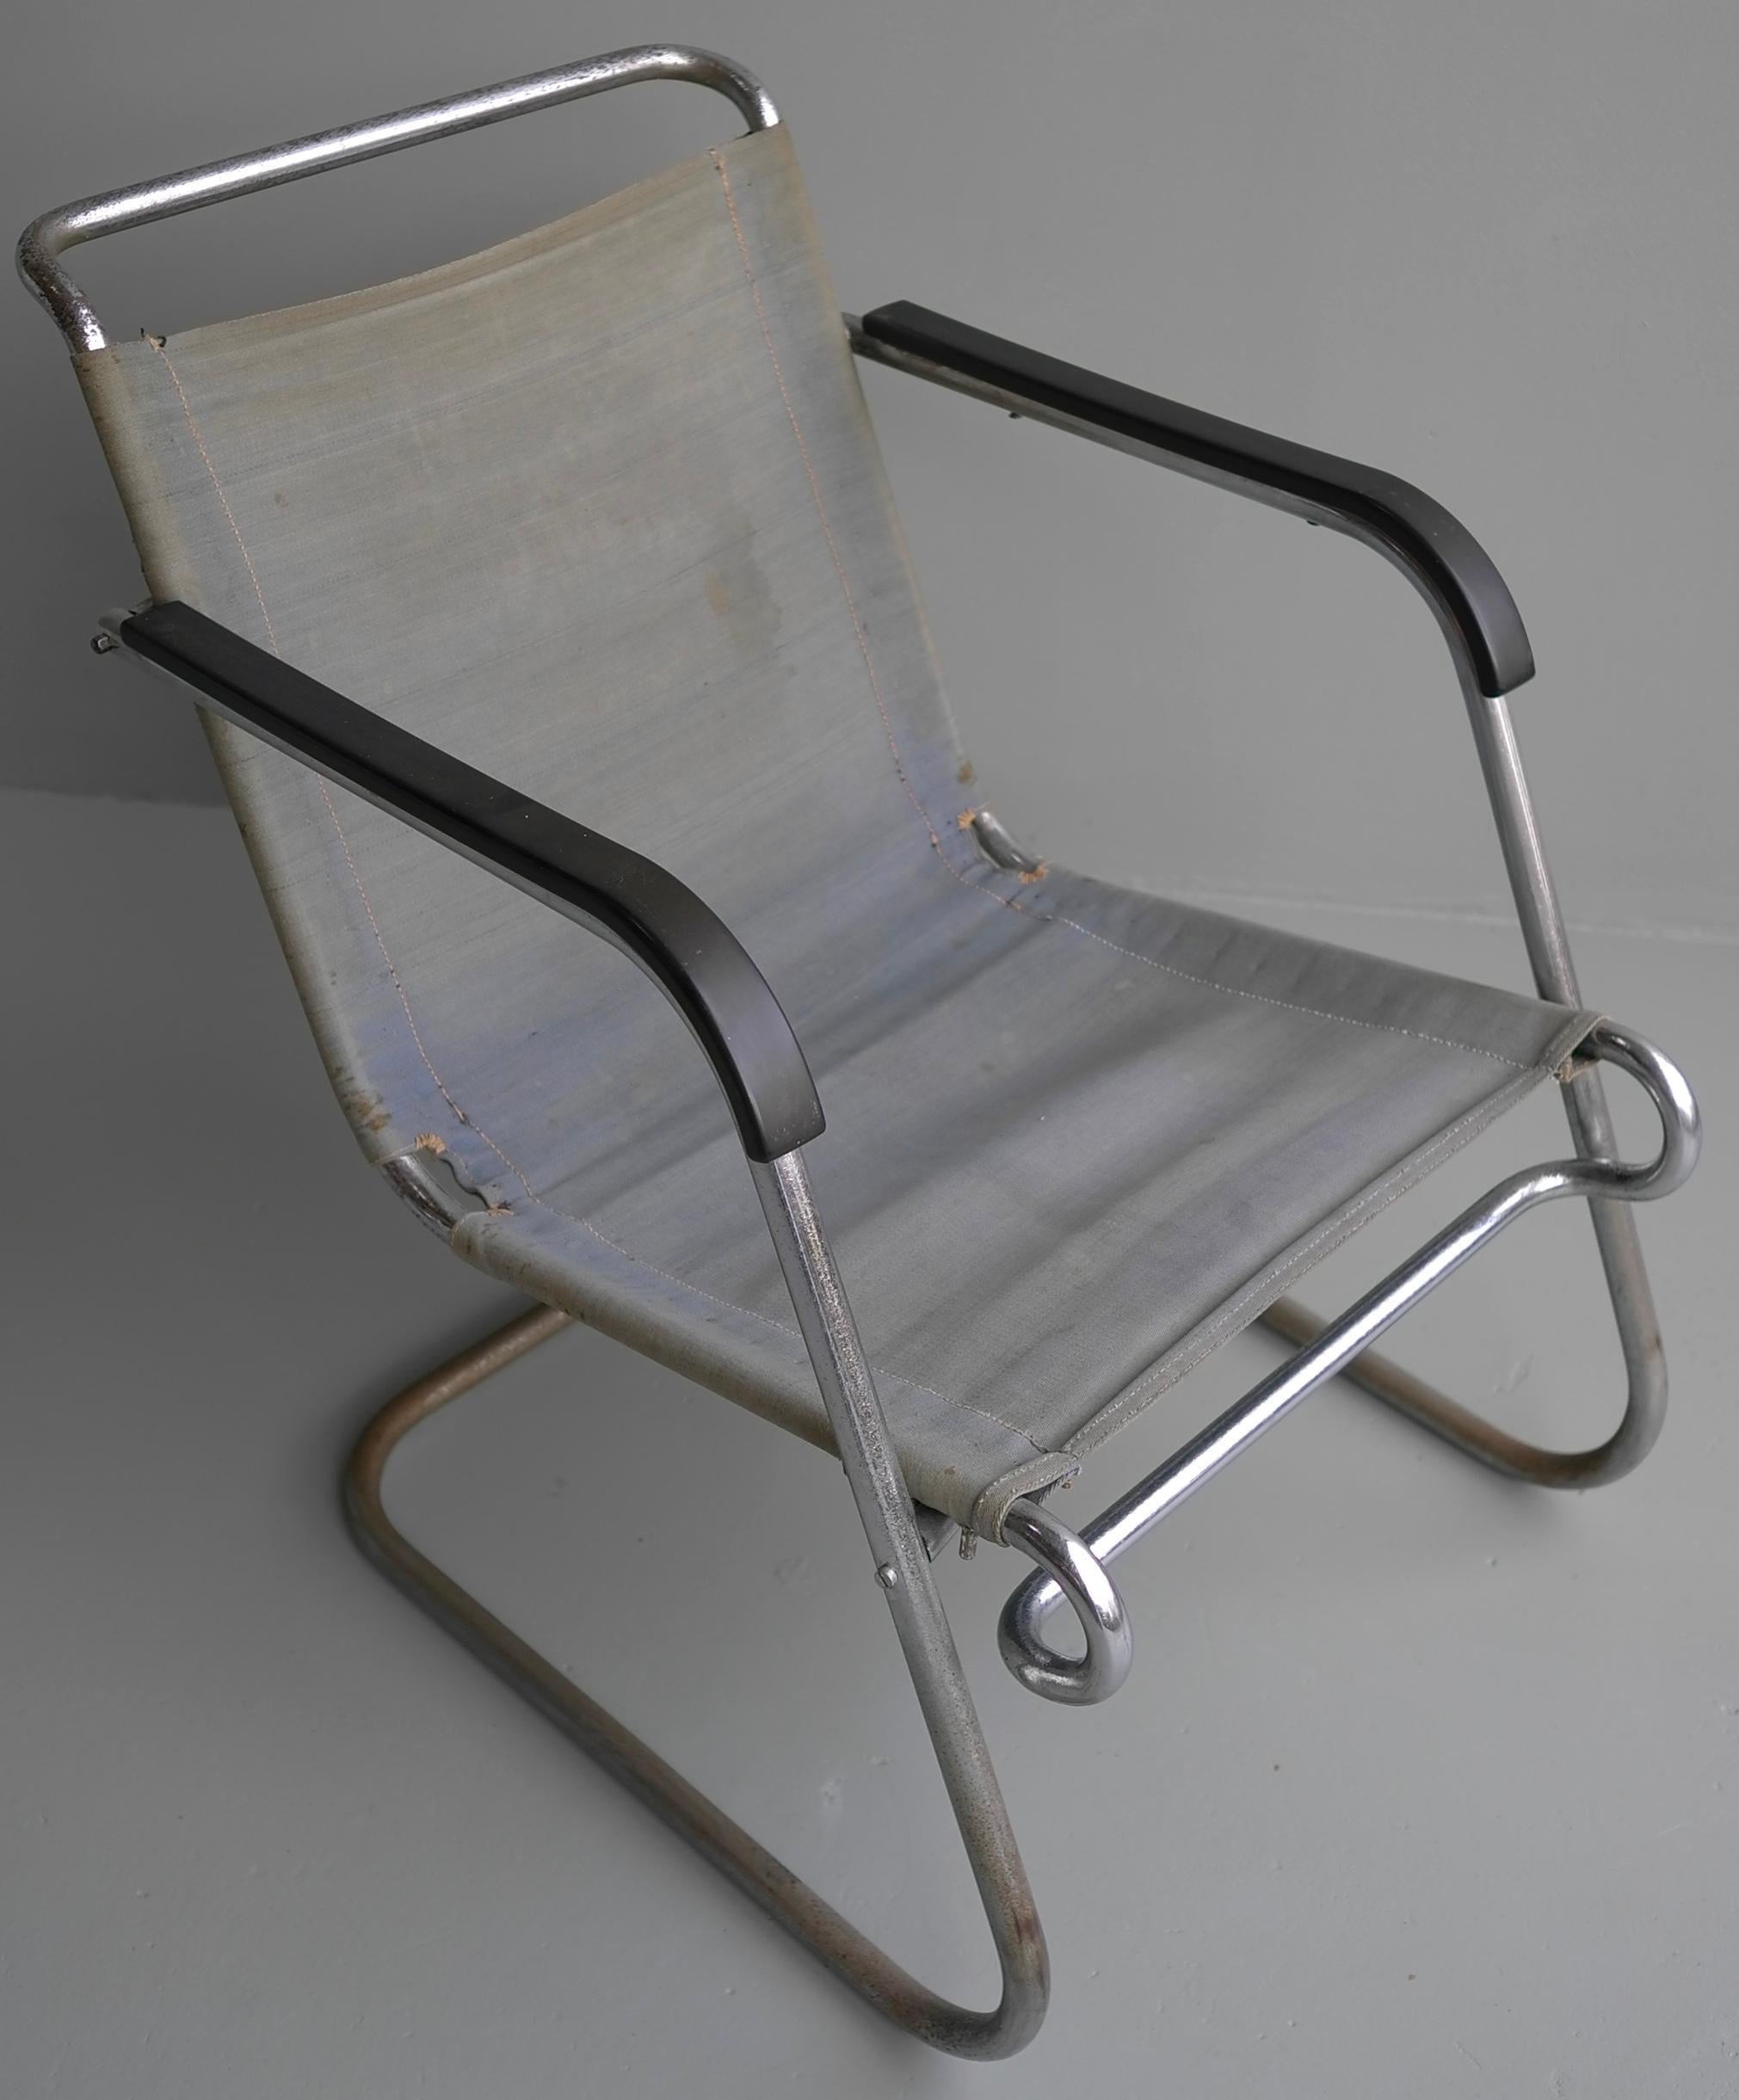 Rare Marcel Breuer BT-24 armchair by Metz & Co. Thonet, 1931
This chair has a chrome steel frame, Bakelite arms and still the original blue Eisengarn upholstery.
One exact same example but in less good condition can be viewed in the permanent